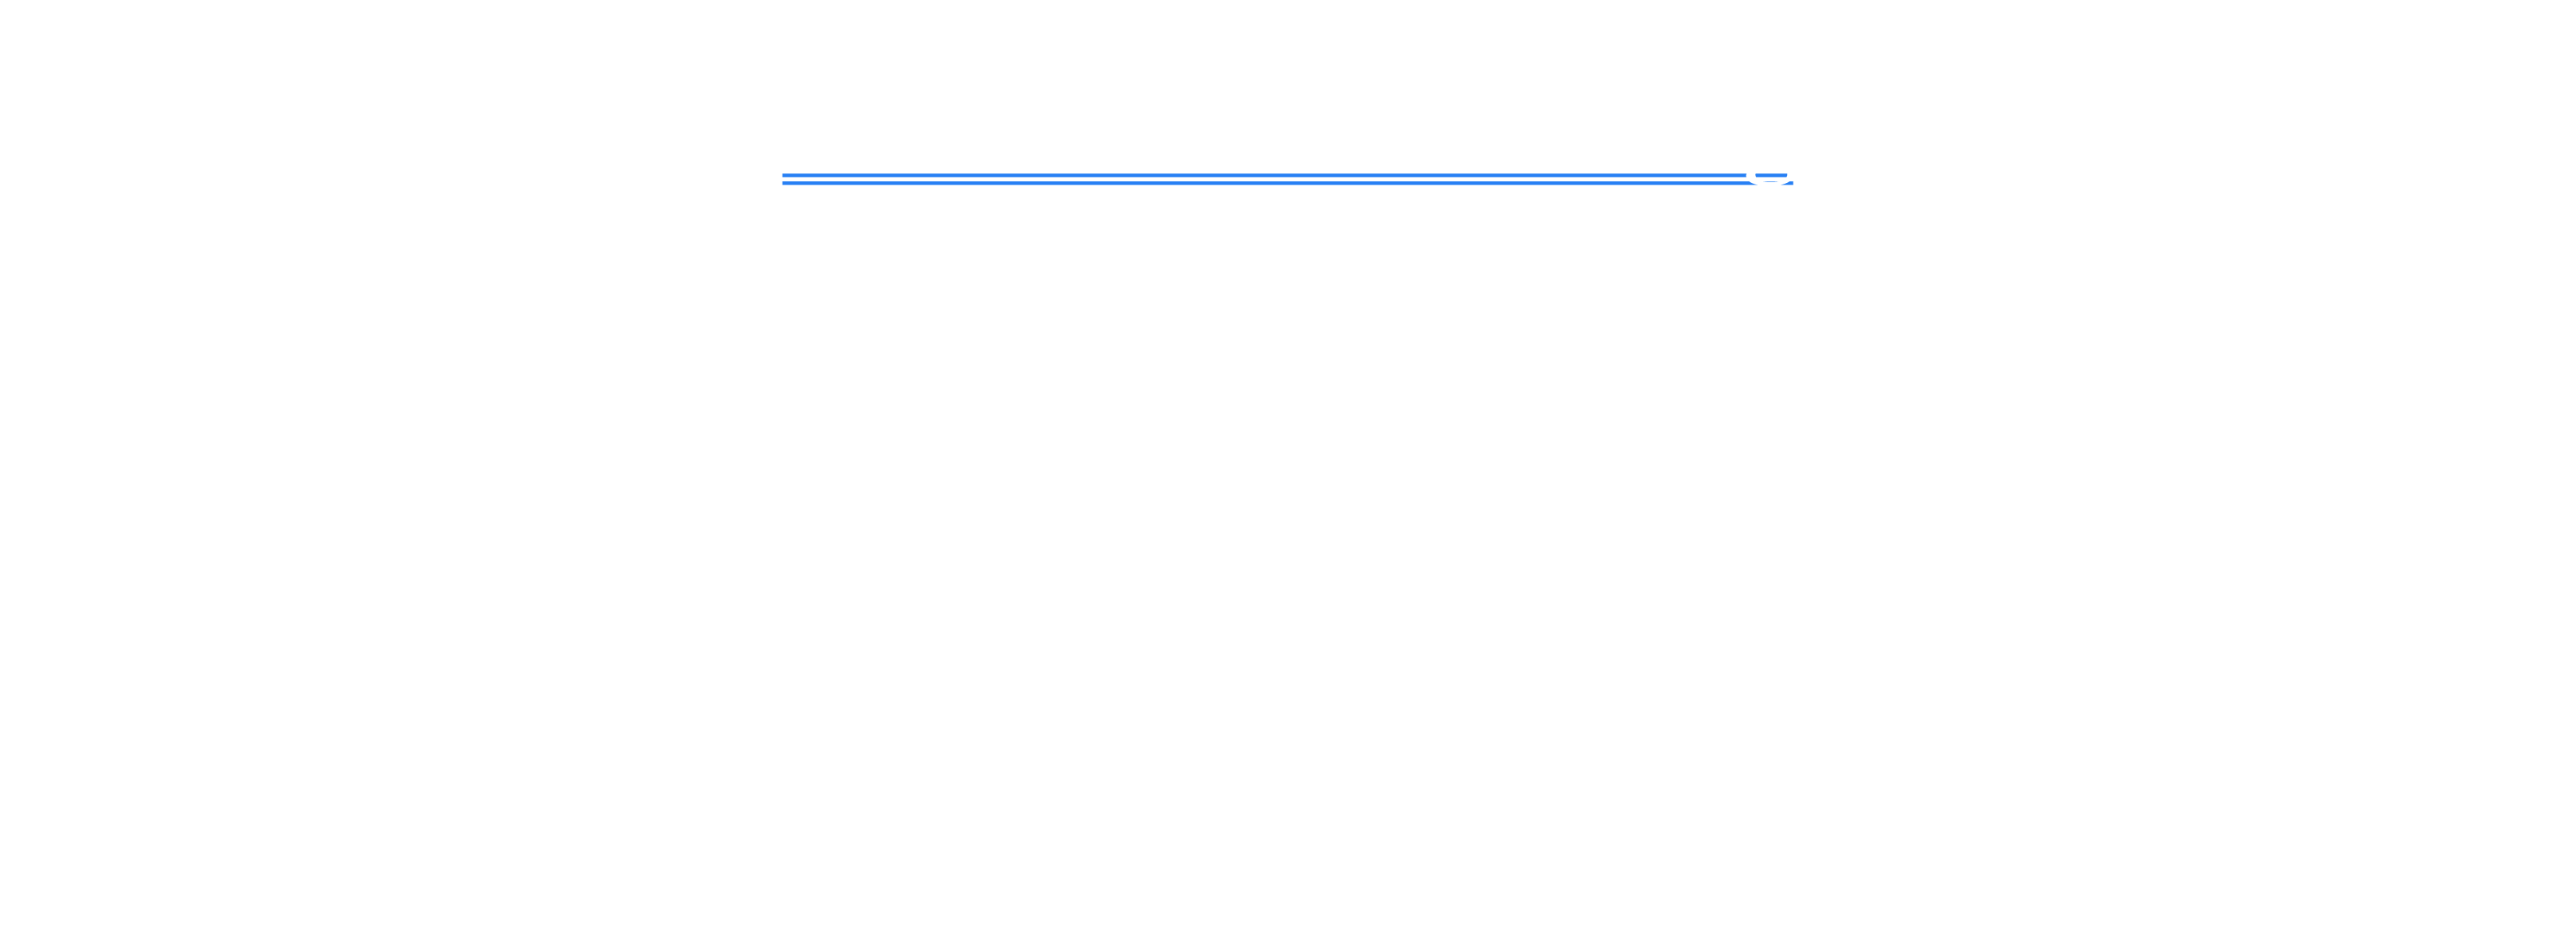 Subcontractor Request_103023-04.png